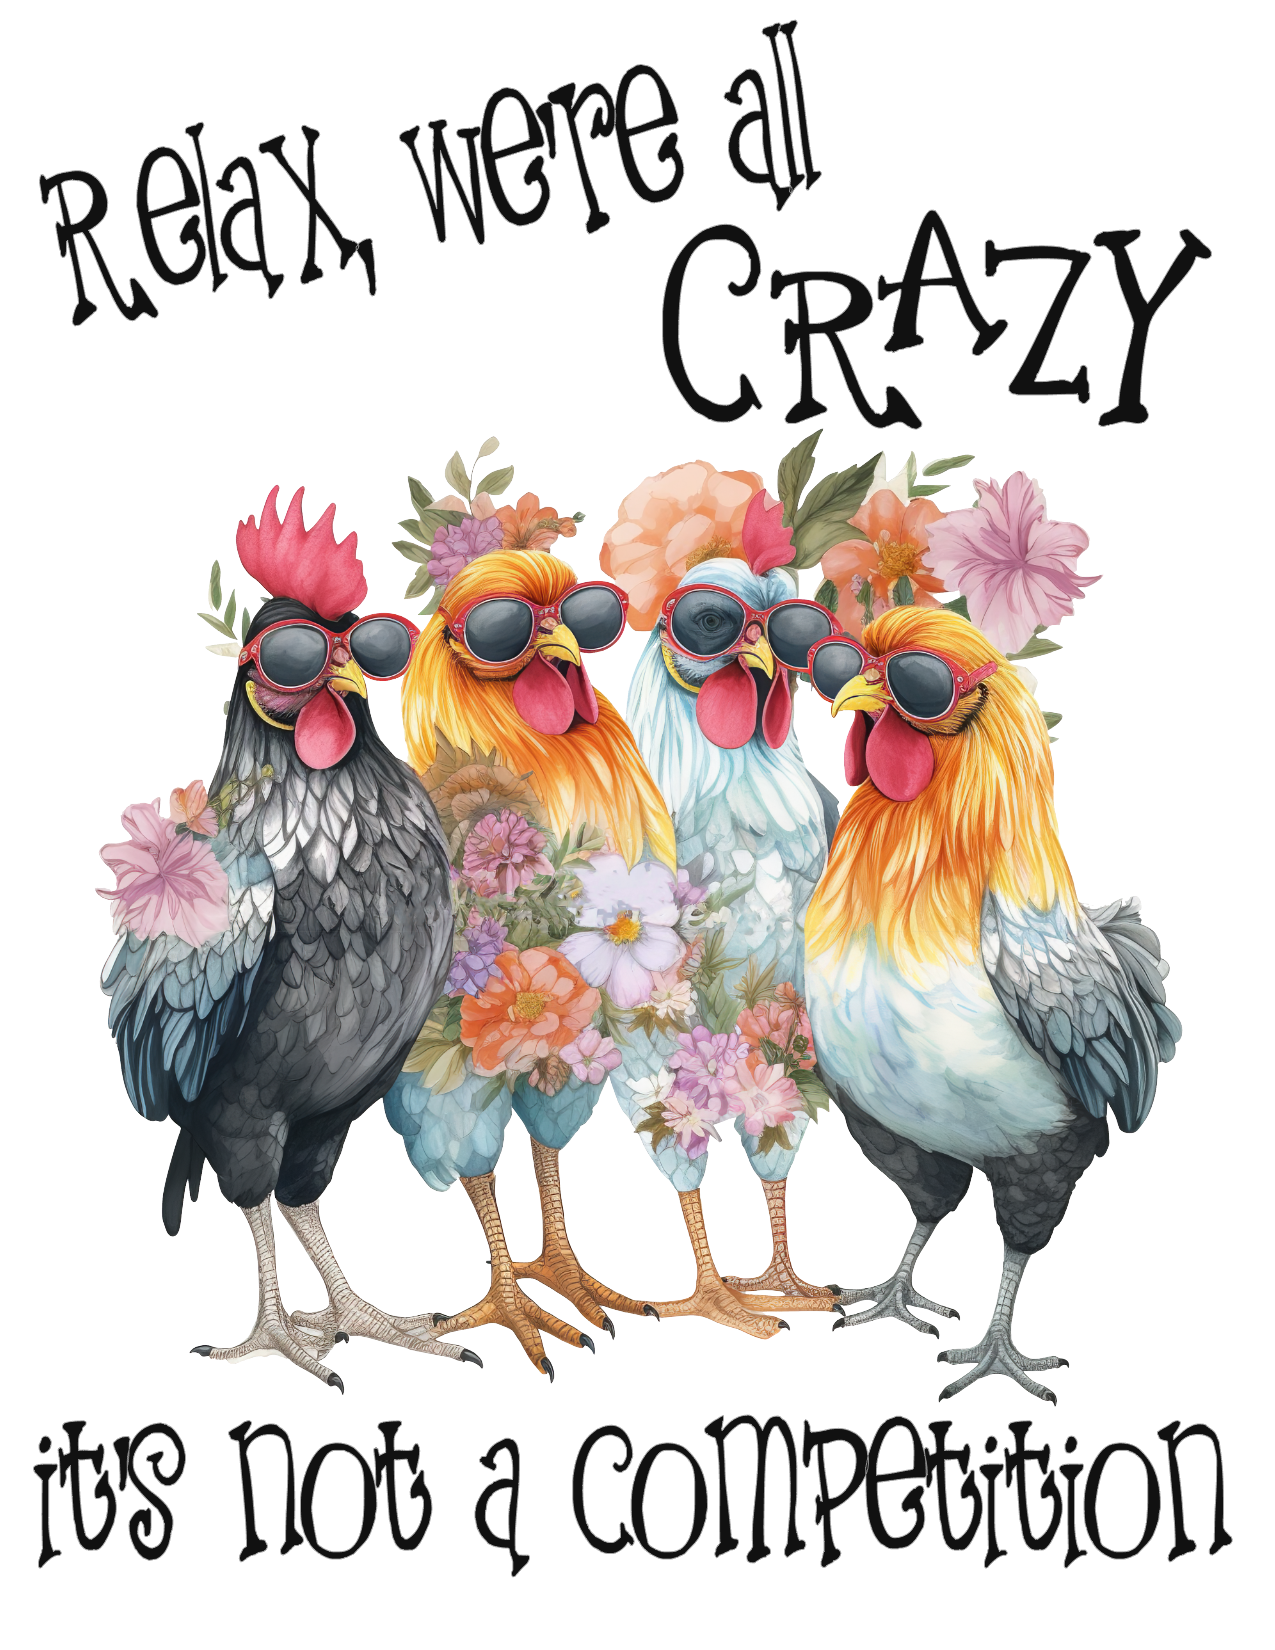 #380 Relax, We're all CRAZY it's not a competition